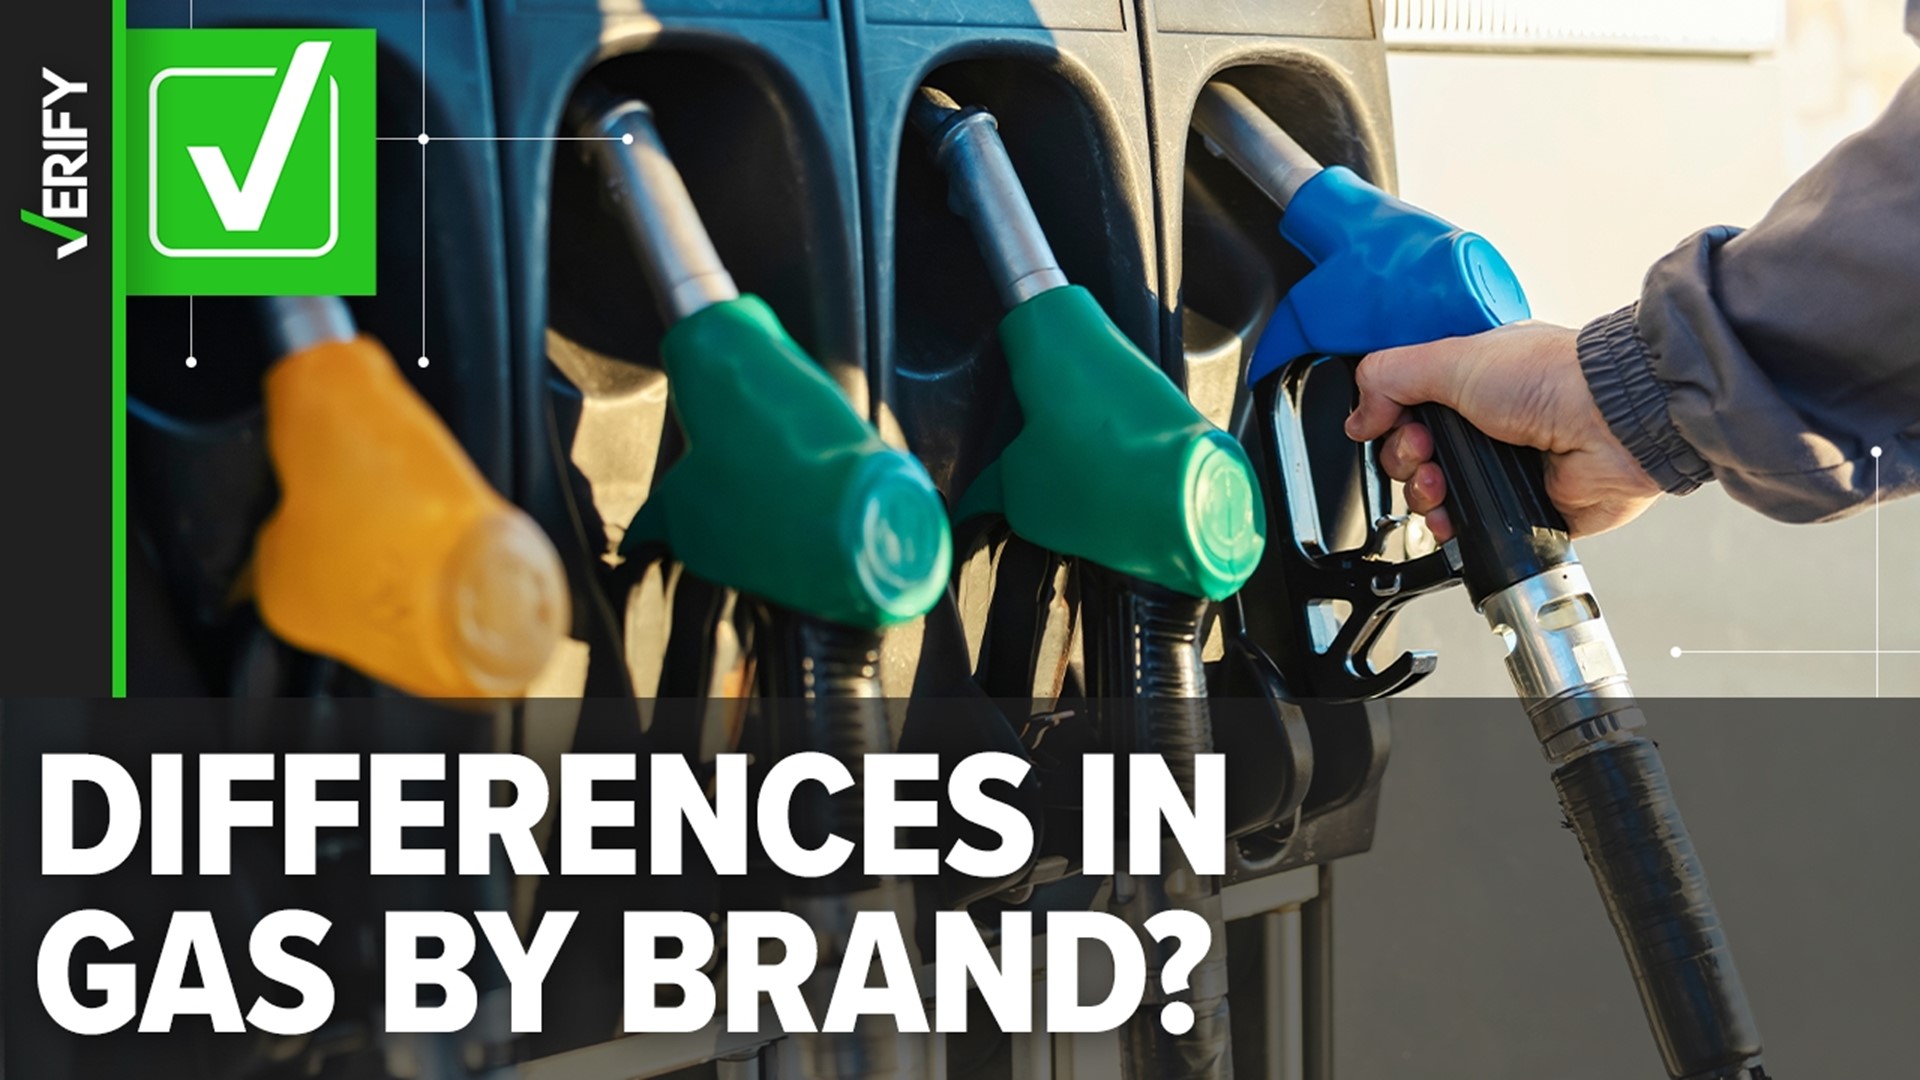 Each gas station brand uses a unique blend of additives to make their gas different from other brands. The additives affect gas quality and your gas mileage.